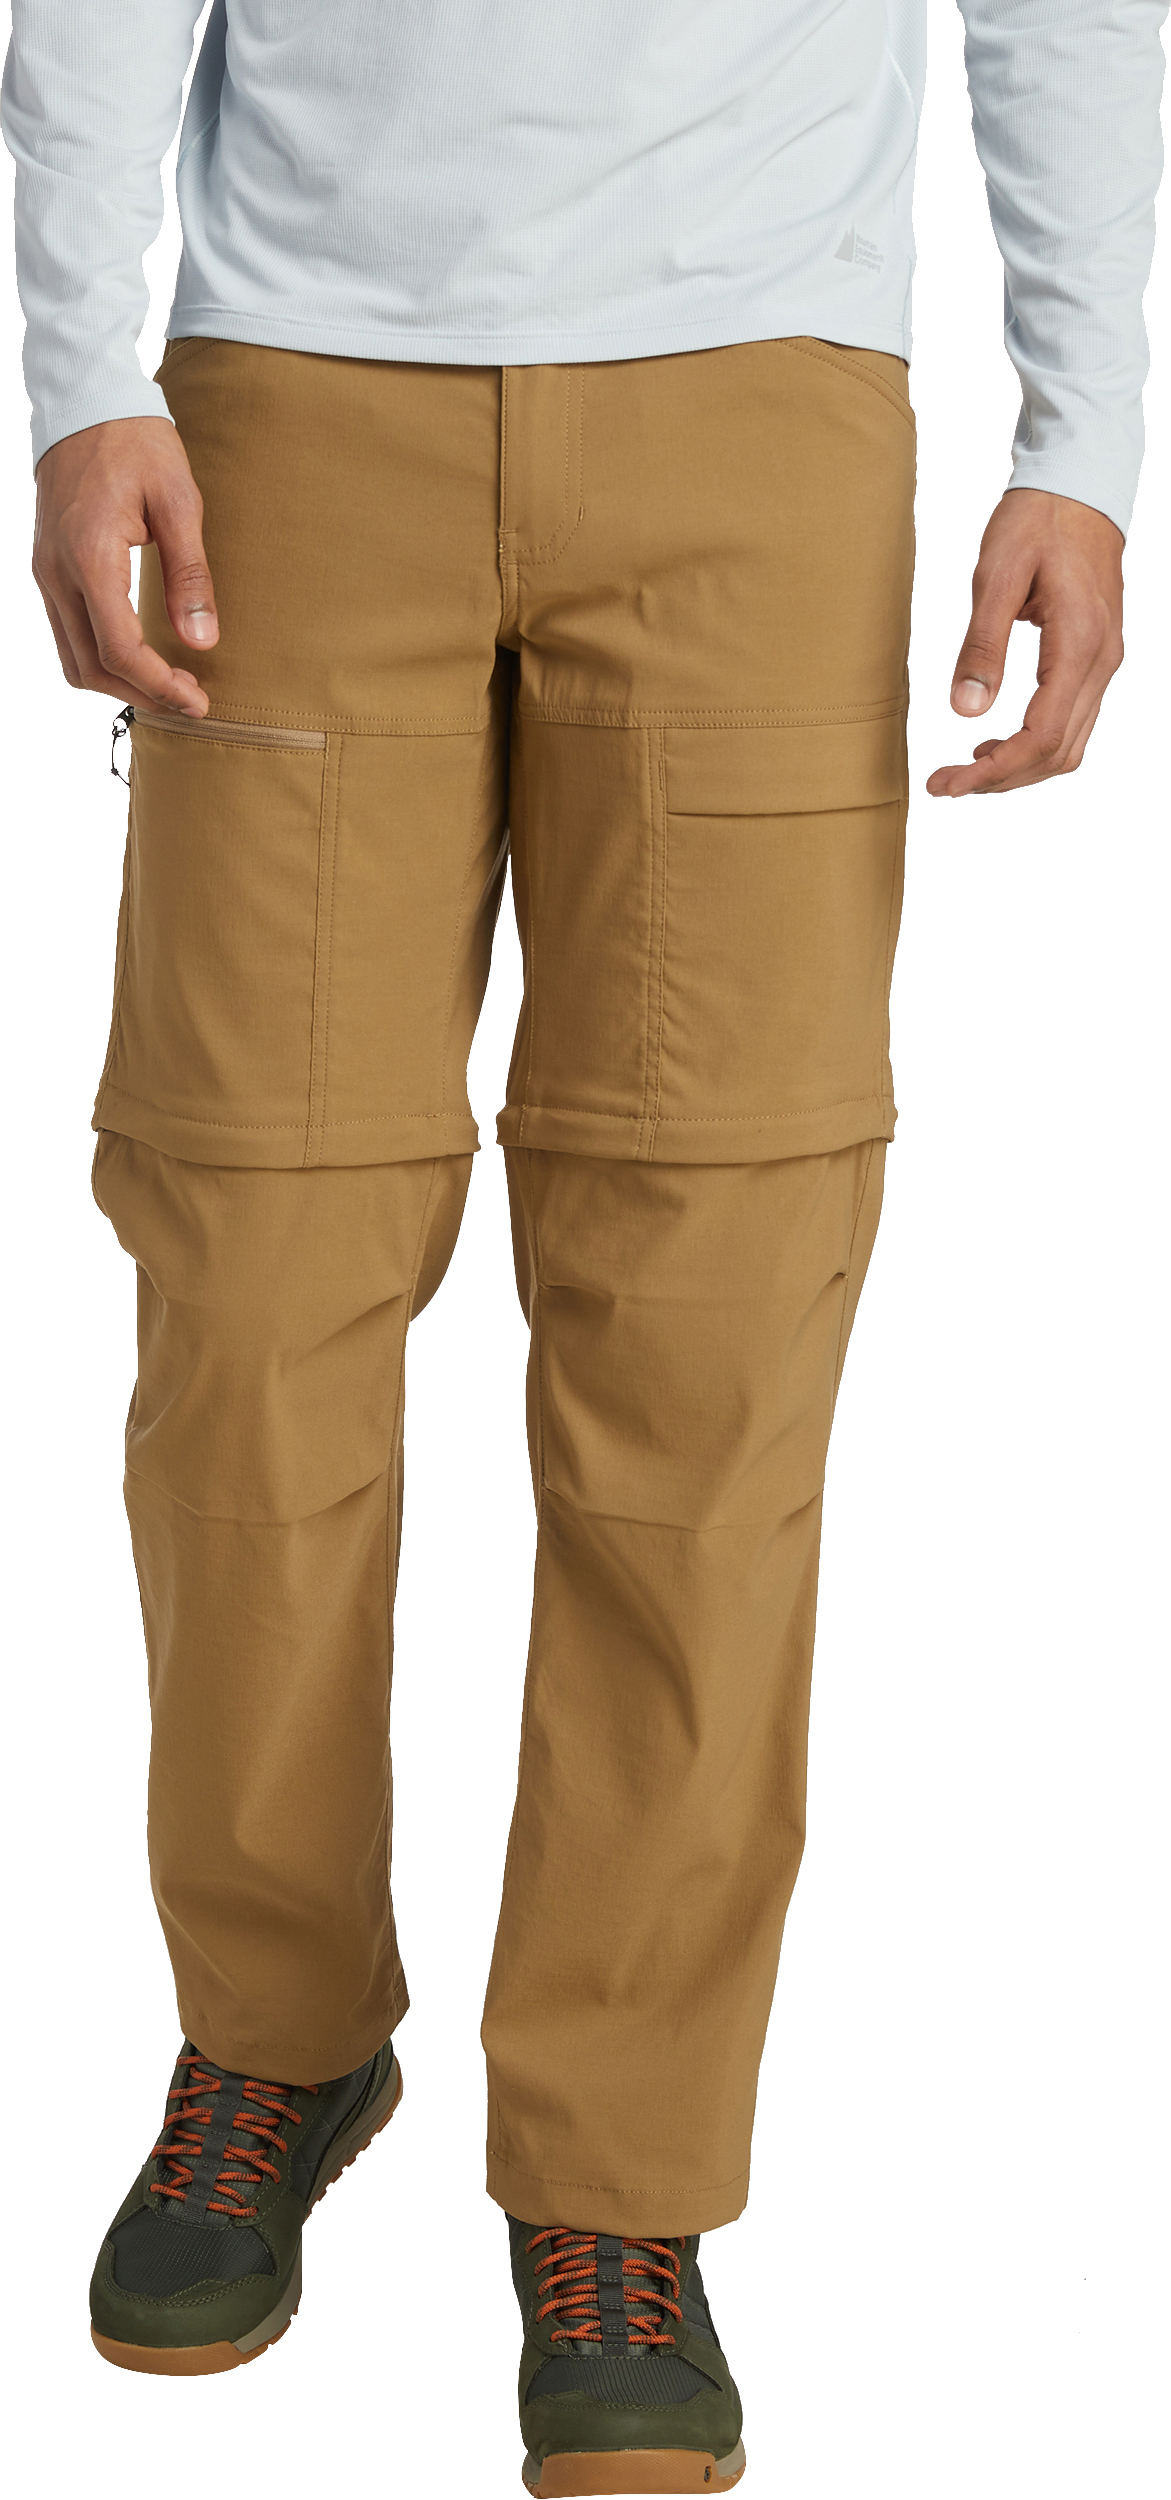 Men's 2 in 1 Pant ACTIVE STRETCH ZIP-OFF M - camel - 2 in 1 pant